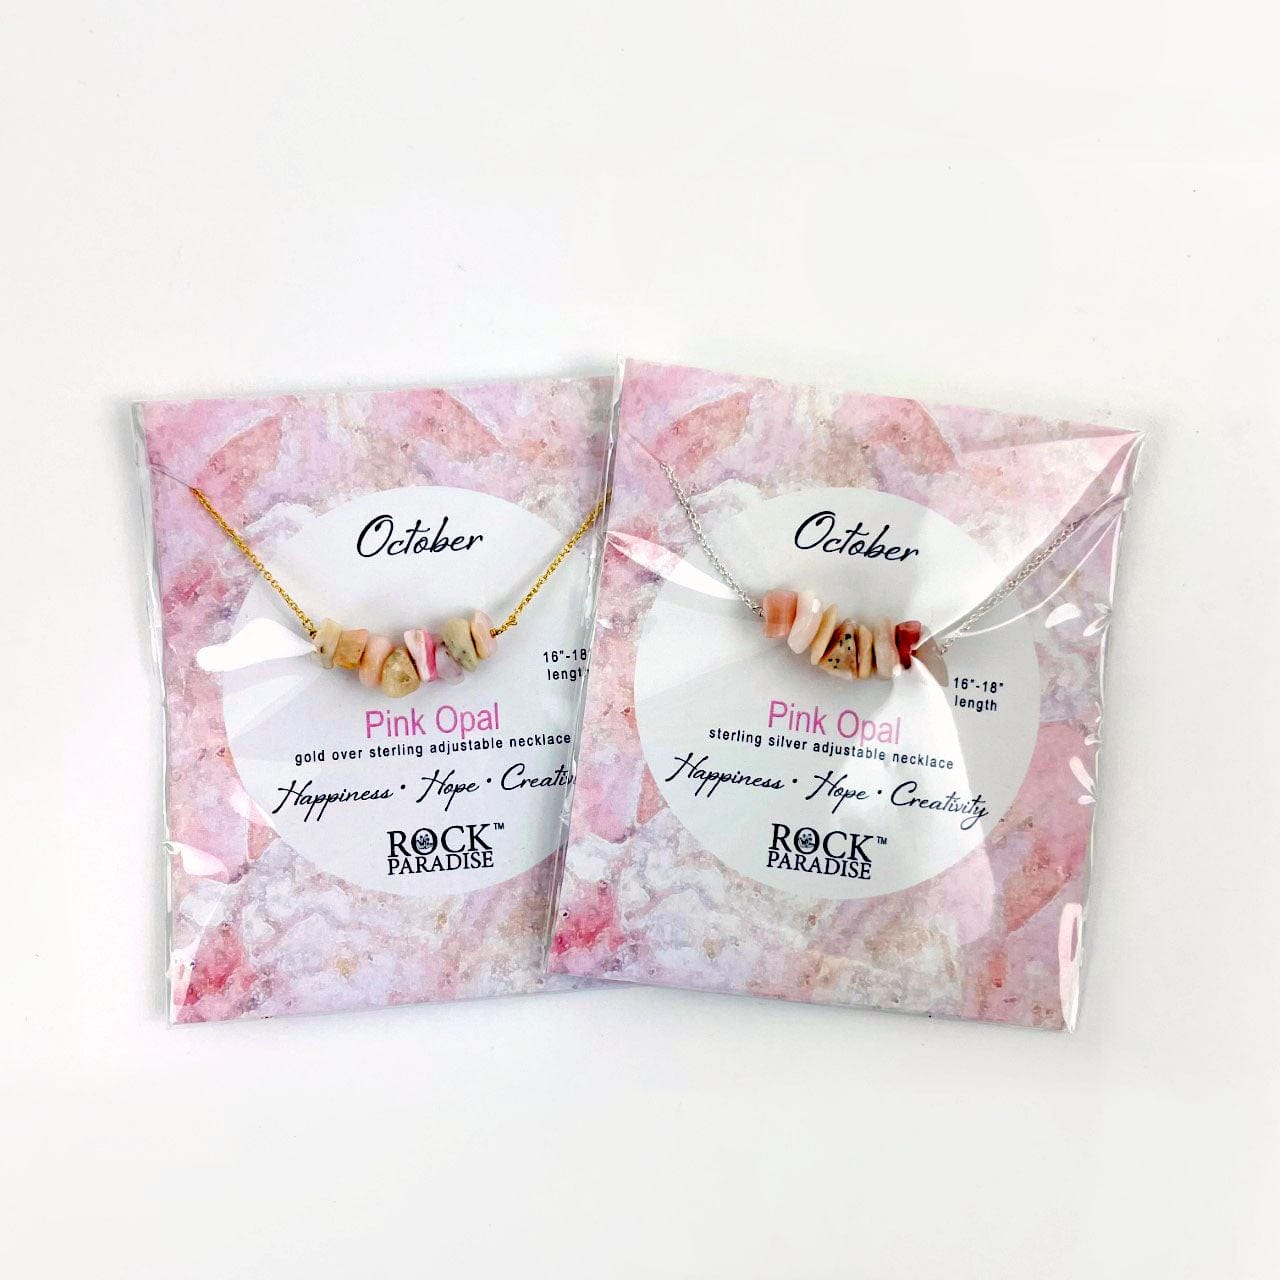 Pink Opal Necklace in packaging